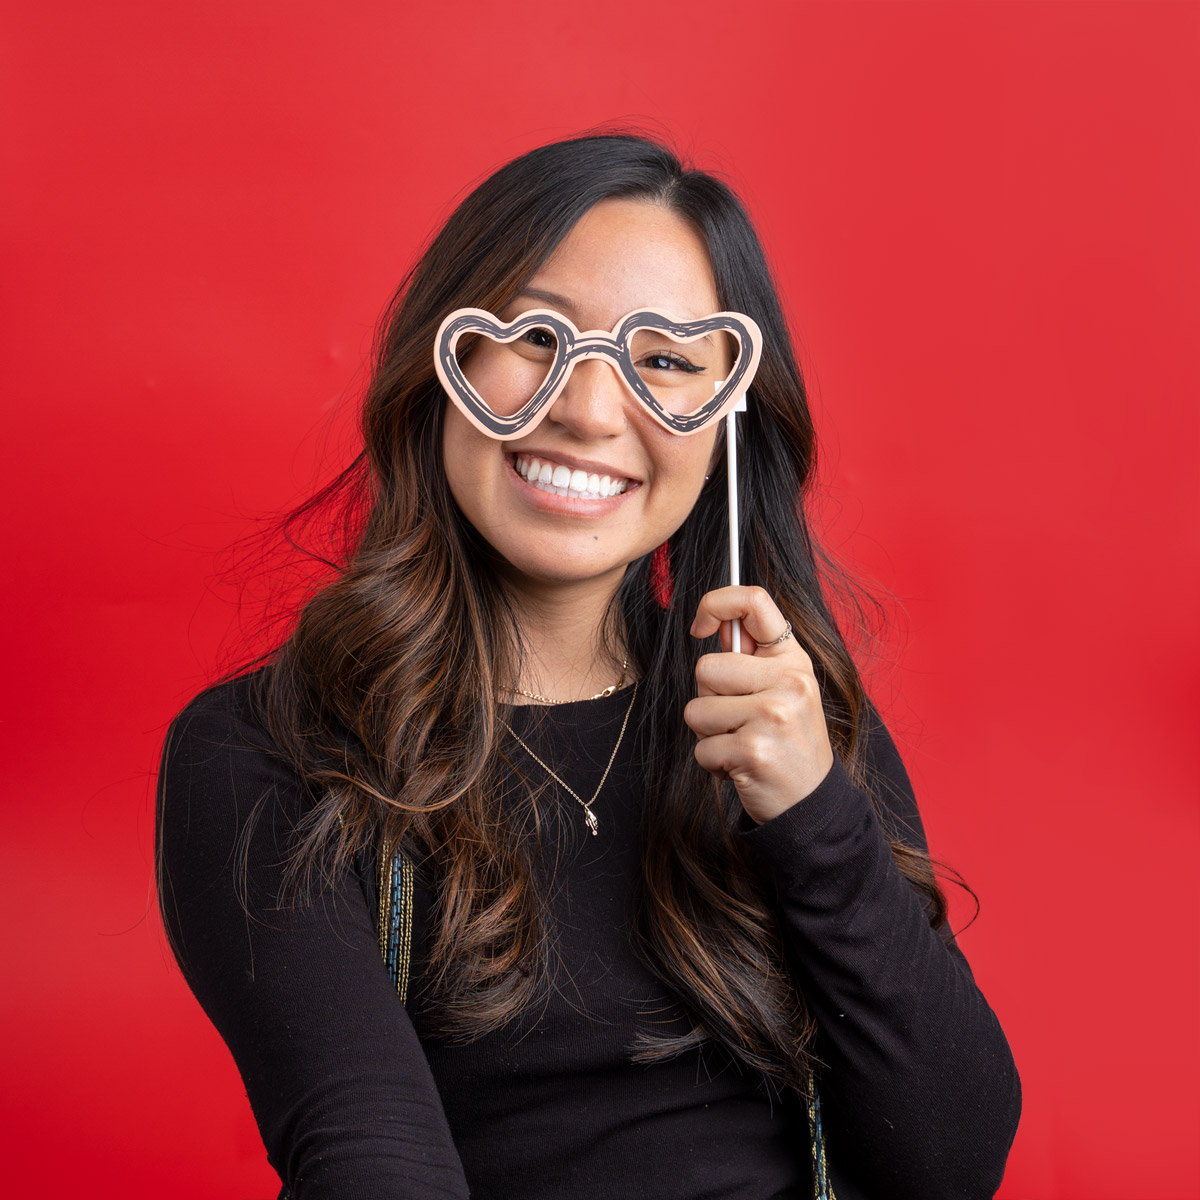 A woman smiling against a red backdrop, while holding up heart glasses.